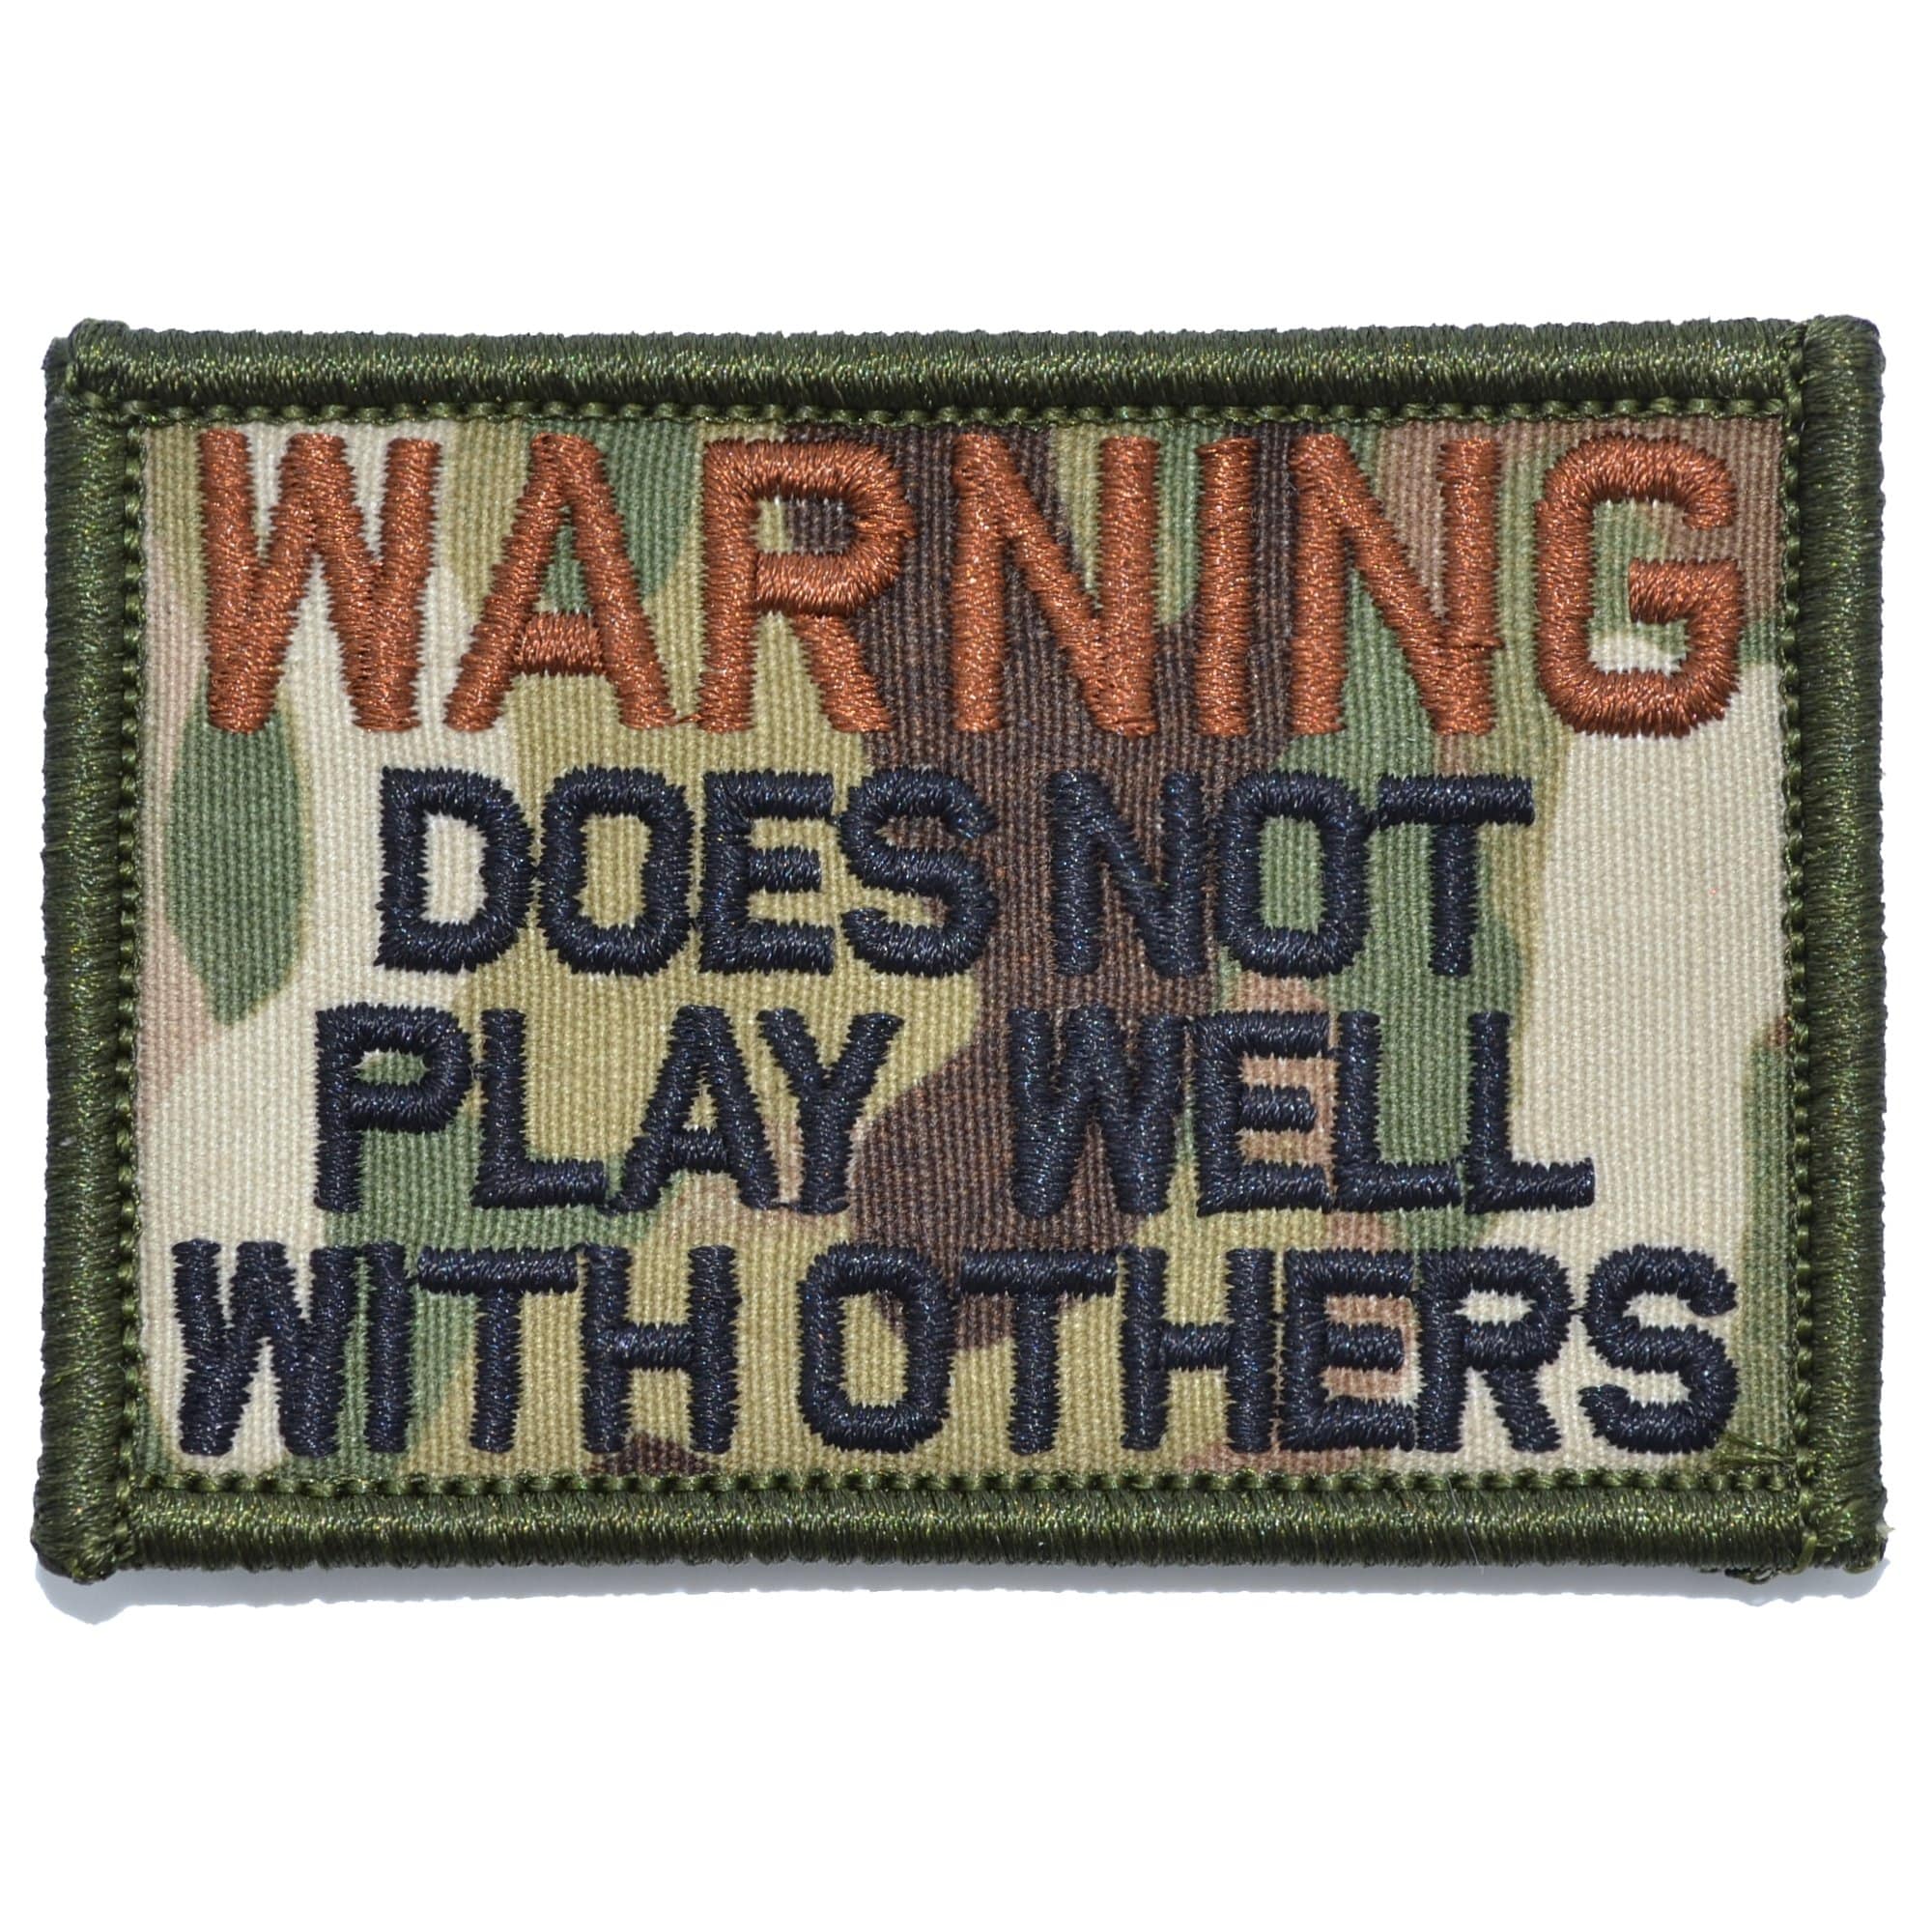 Tactical Gear Junkie Patches MultiCam WARNING: Does Not Play Well With Others - 2x3 Patch